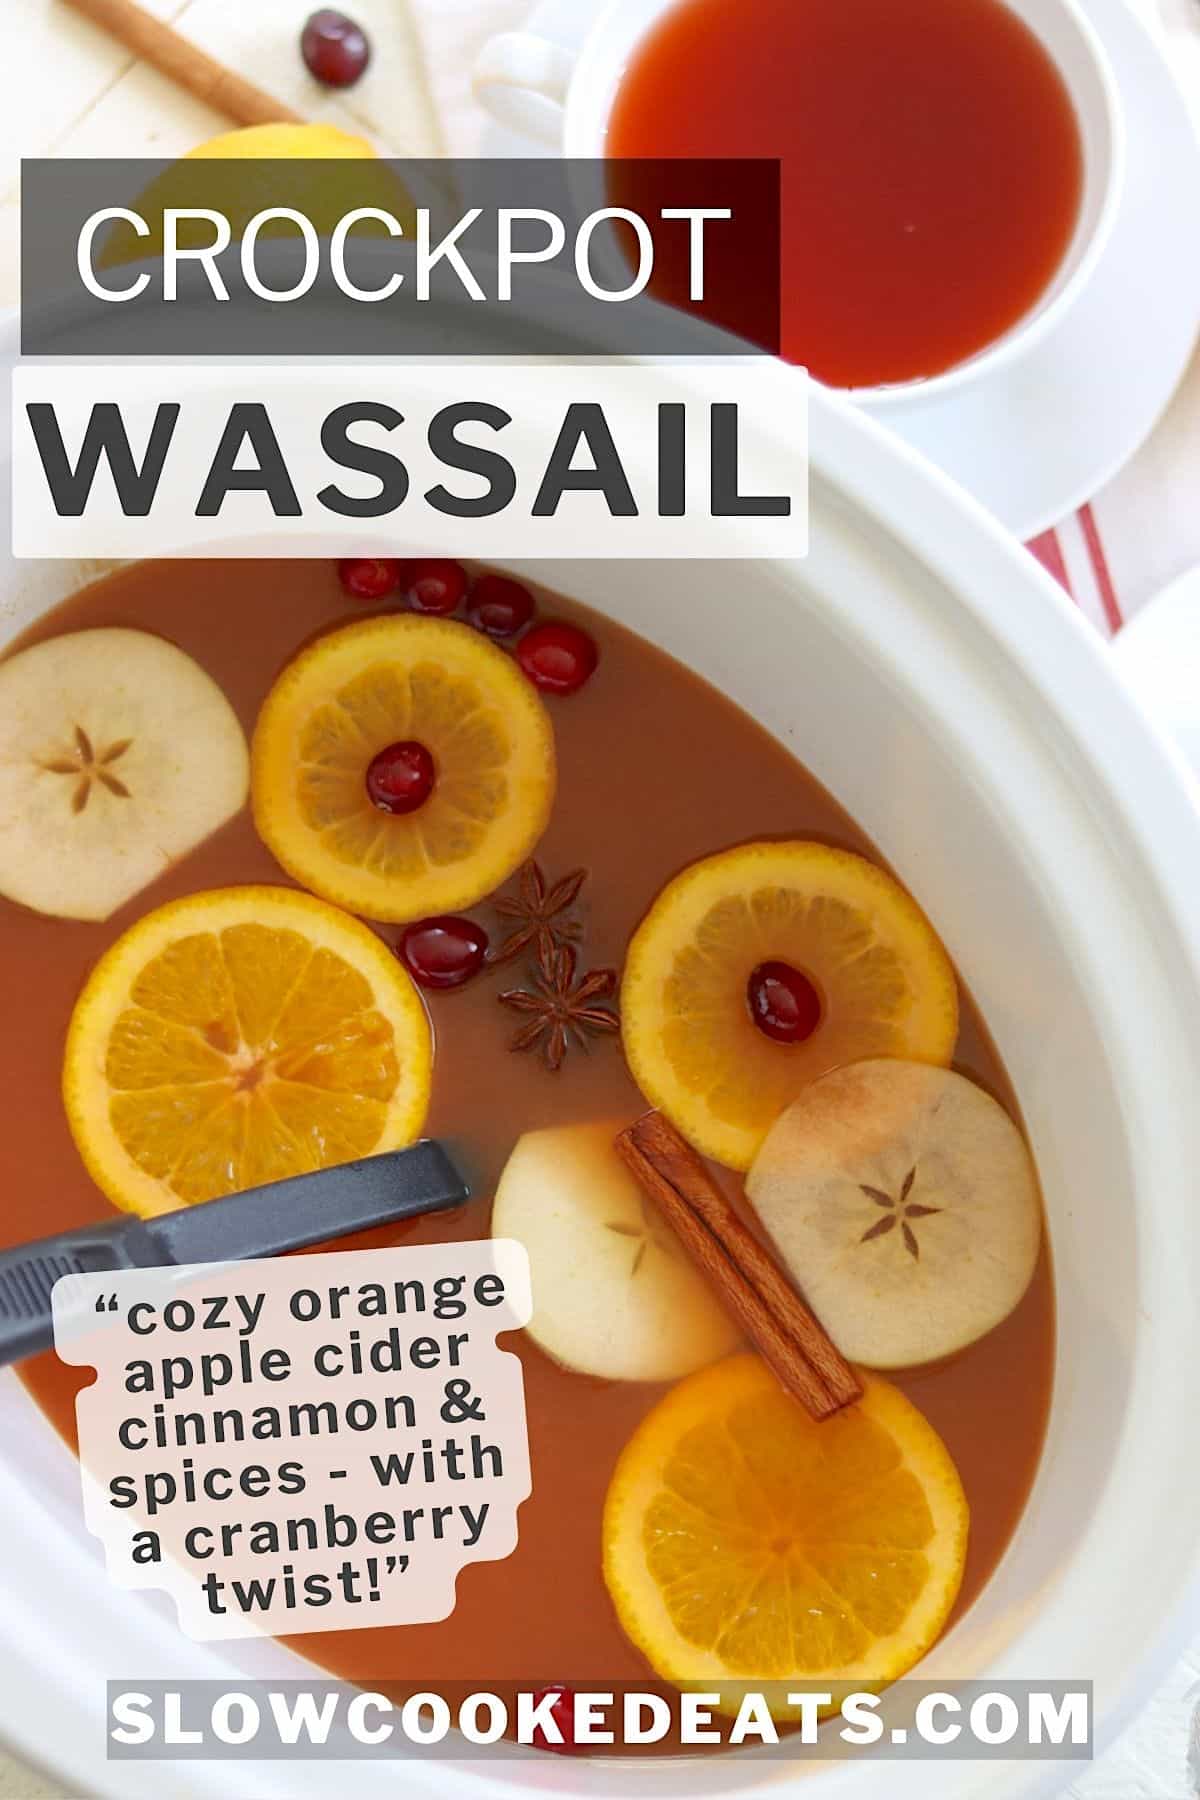 Pinterest pin with crockpot wassail with floating lemon slices, cranberries, and apple slices.